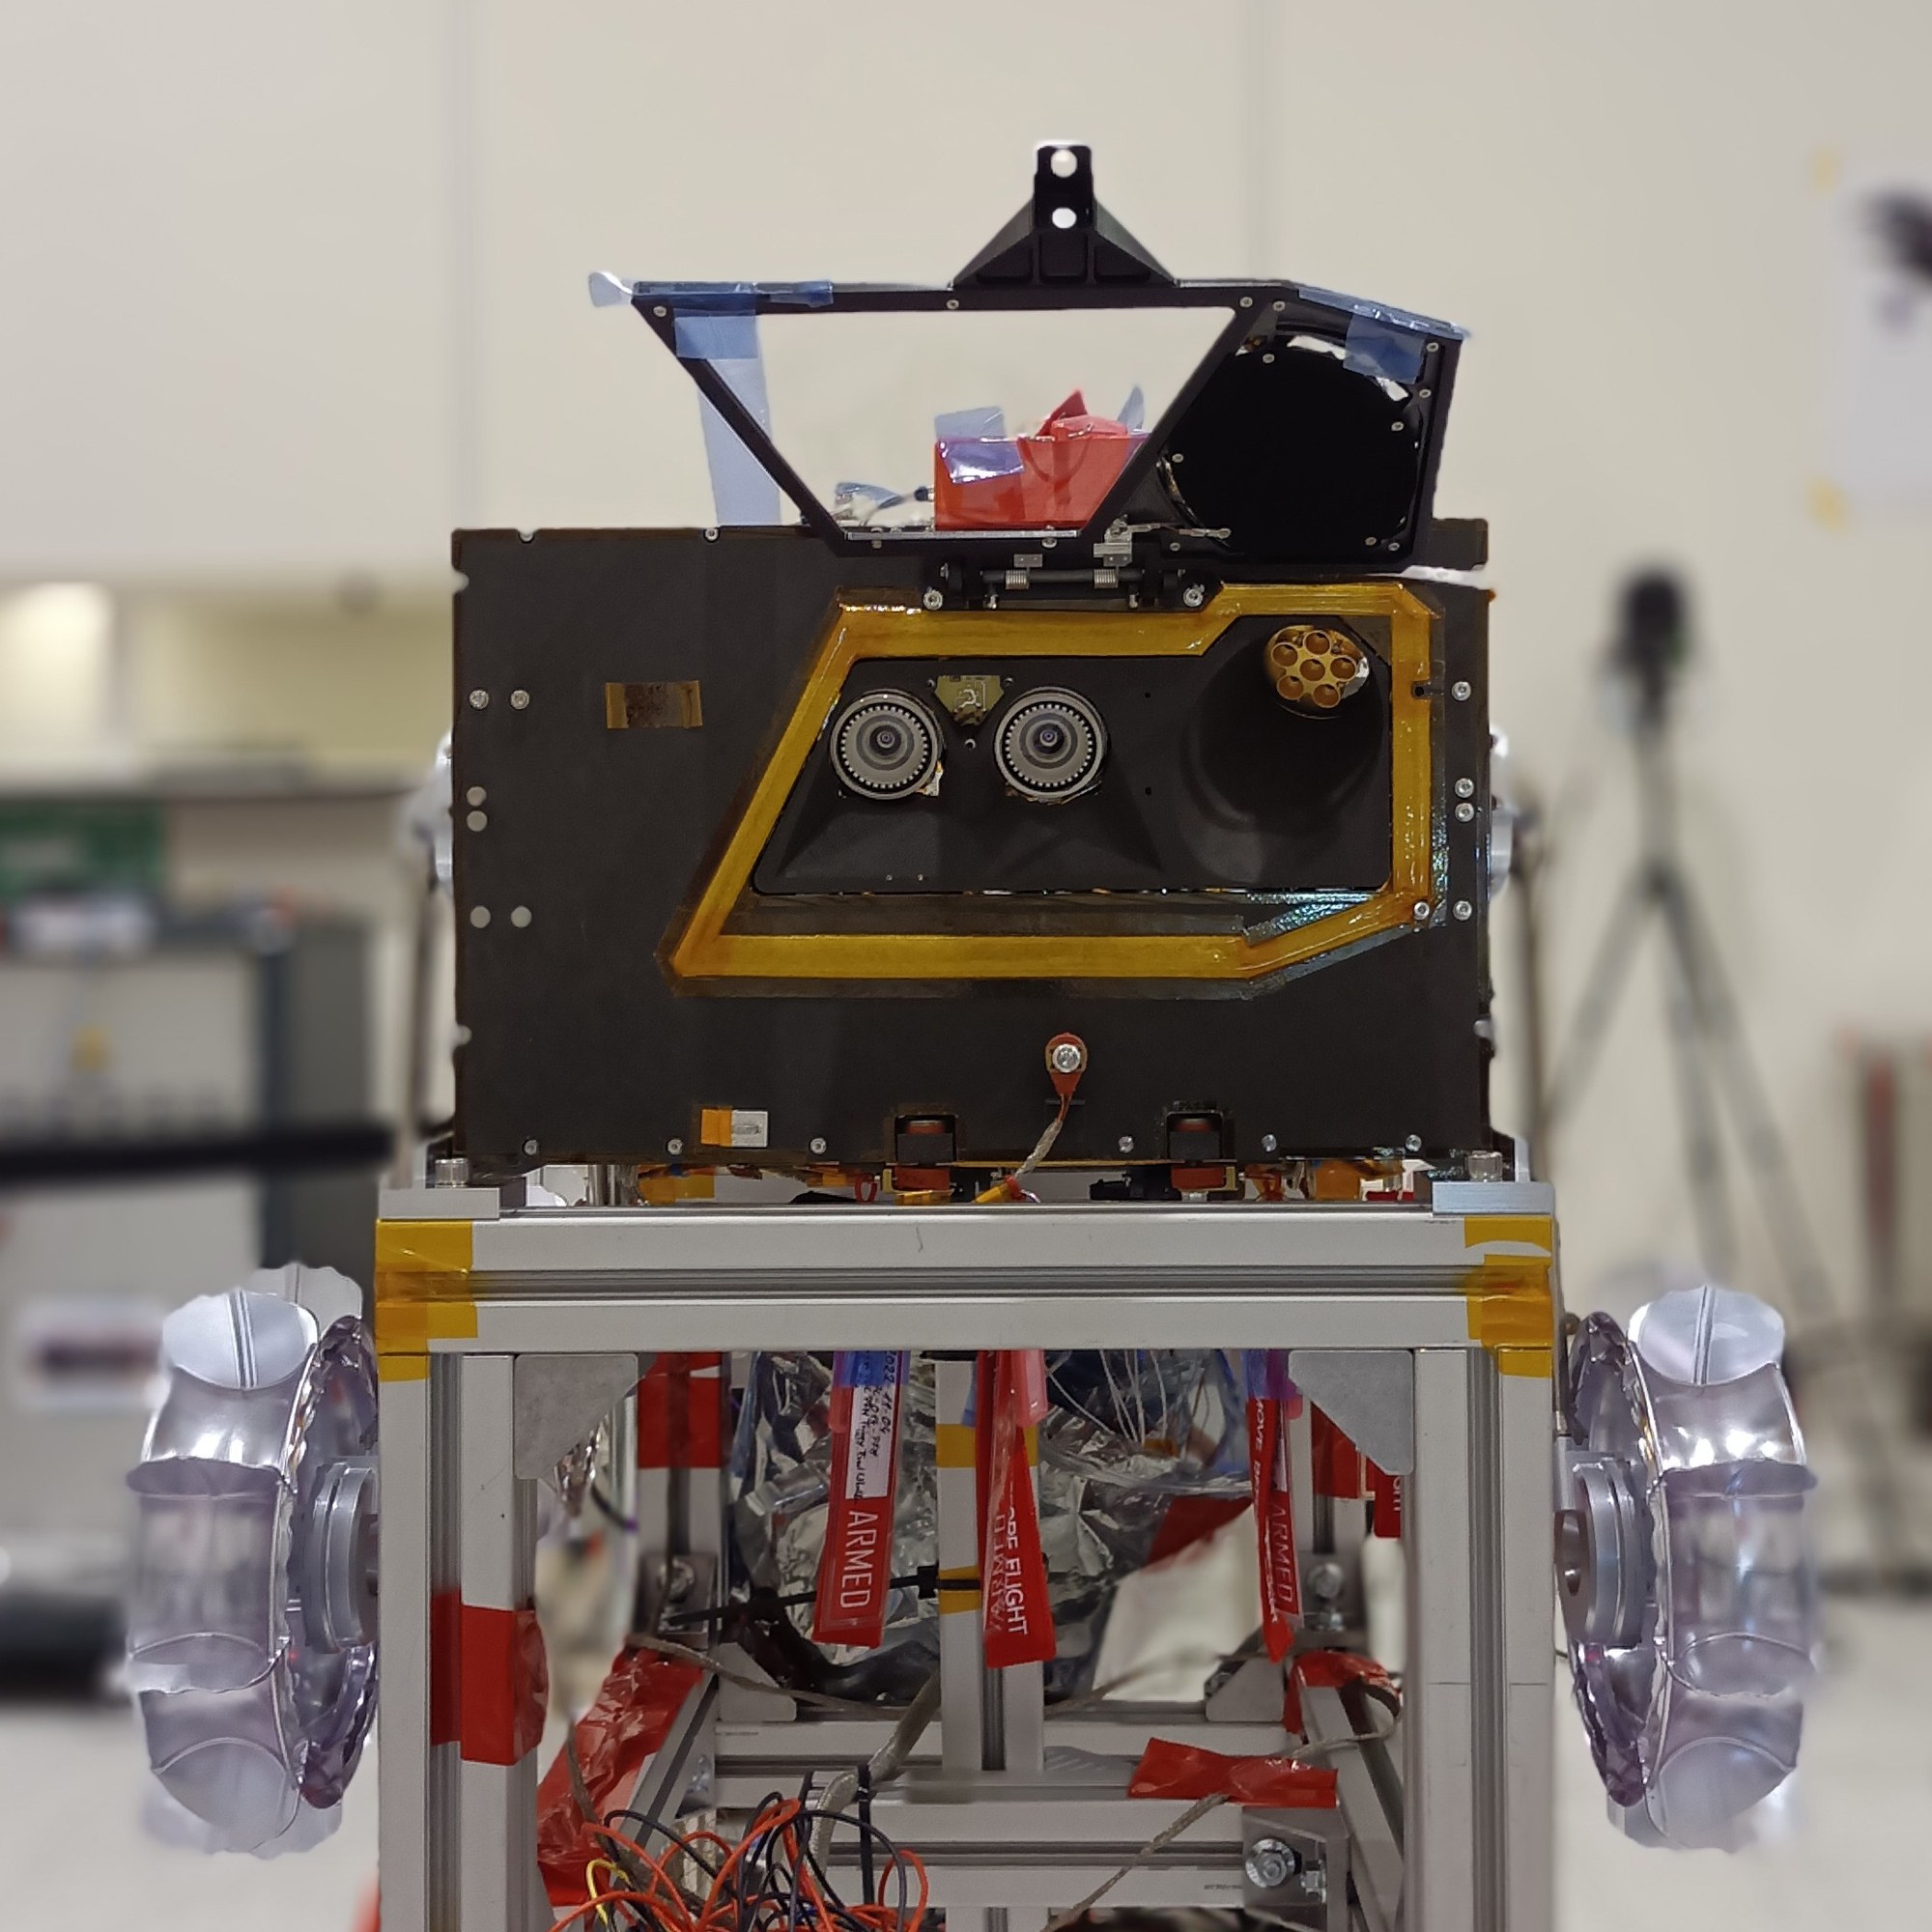 View of the rover's navigation cameras and spectrometer